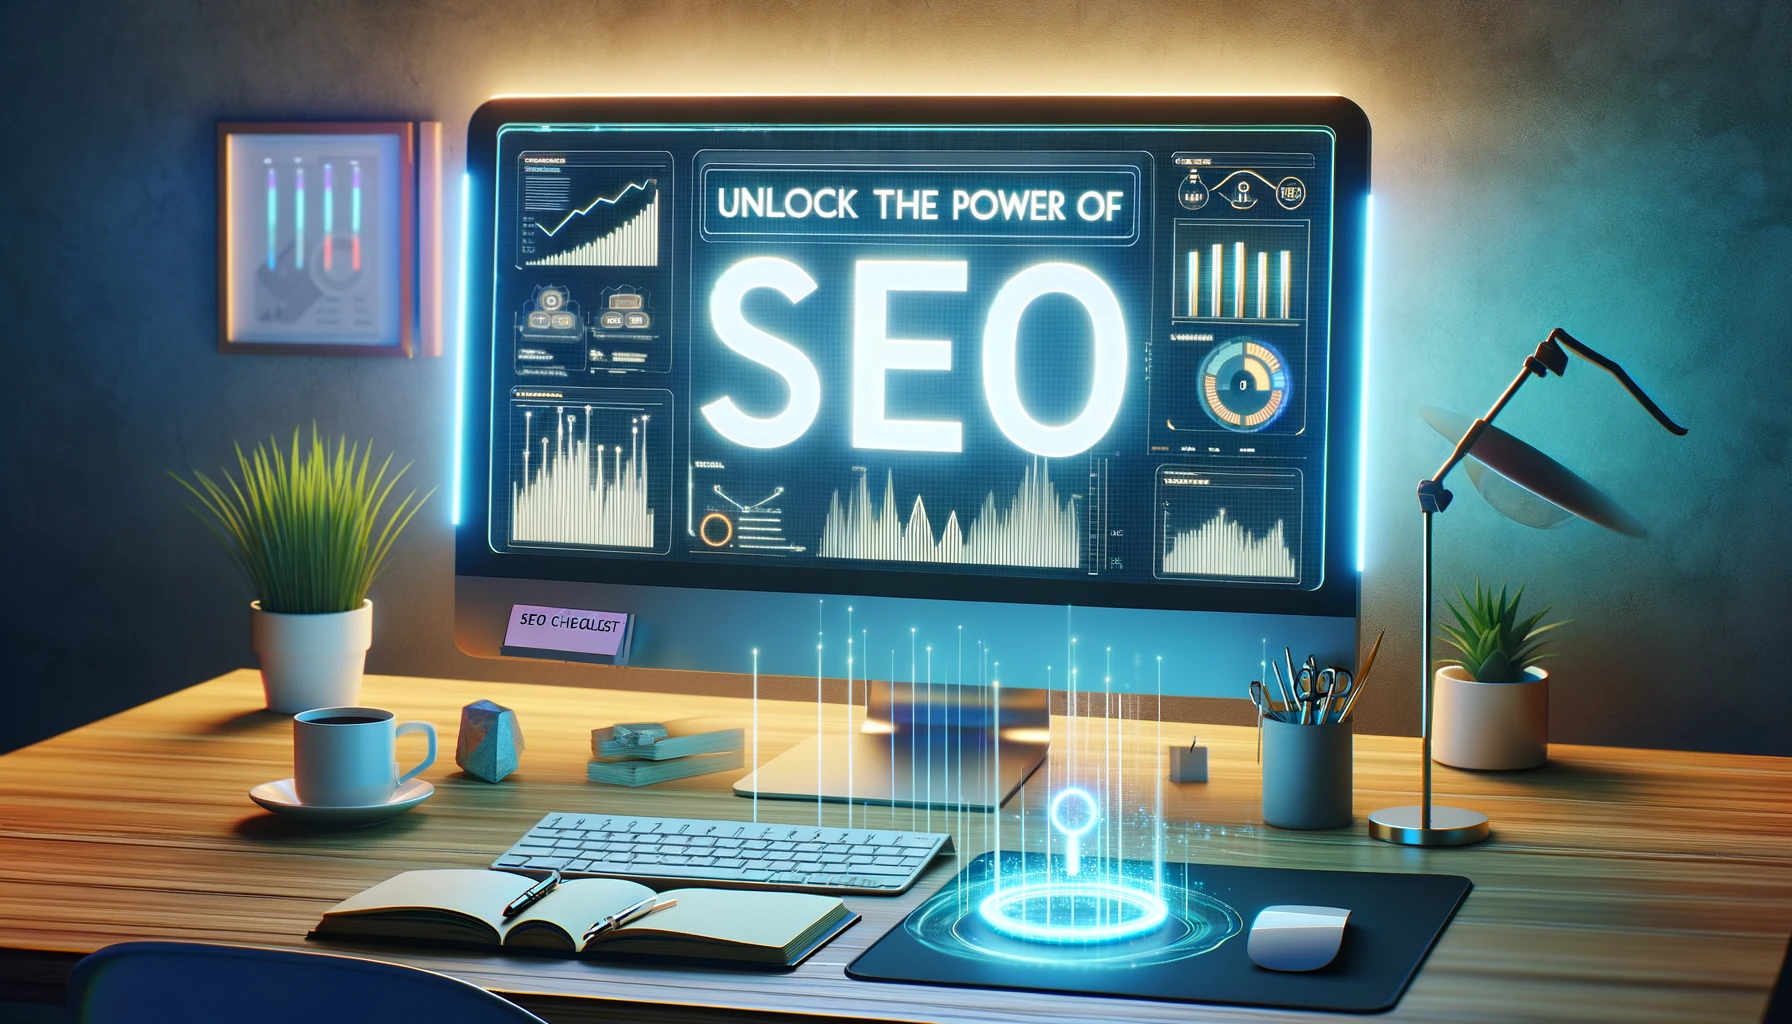 Unlocking the Power of SEO: A Guide to Choosing the Right SEO Tool